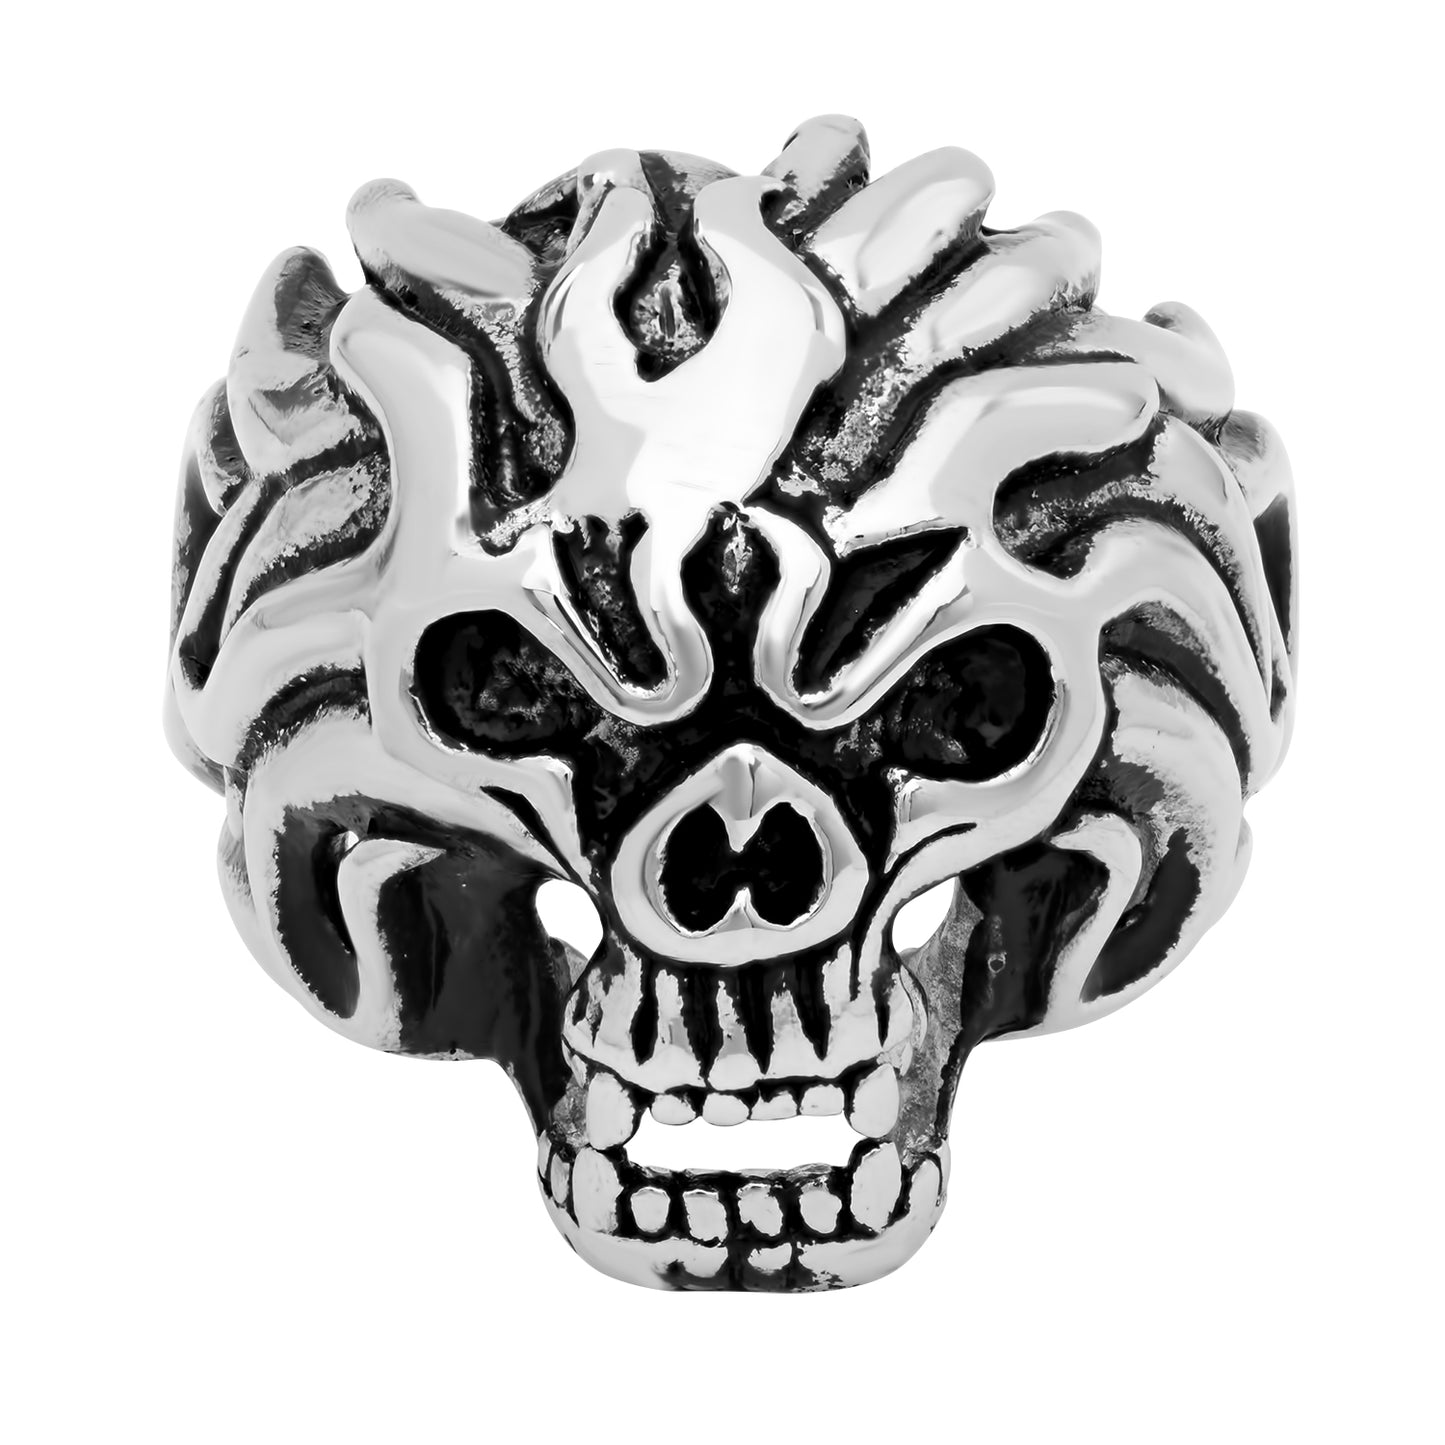 26mm Stainless Steel Flaming Demon Skull Ring + Jewelry Cloth & Pouch (SKU: ST-SKR129)